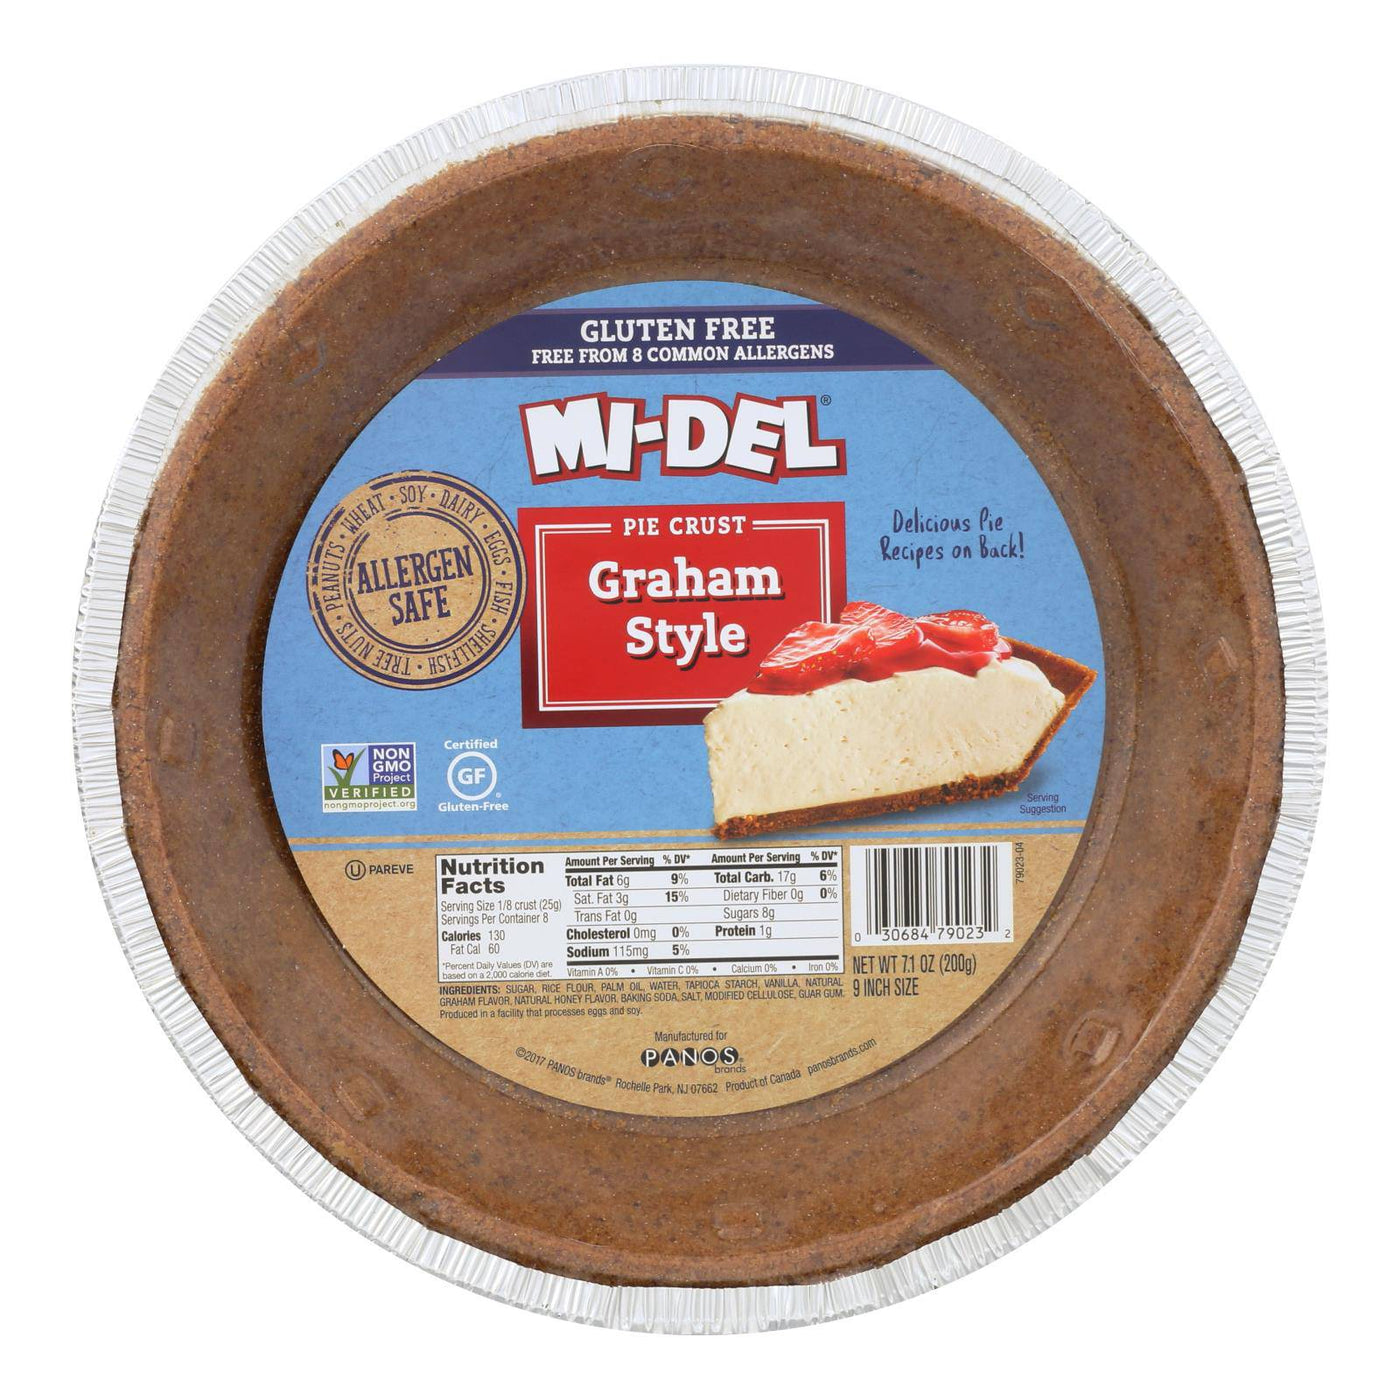 Buy Midel Gluten Free Graham Style Pie Crust - Case Of 12 - 7.1 Oz.  at OnlyNaturals.us